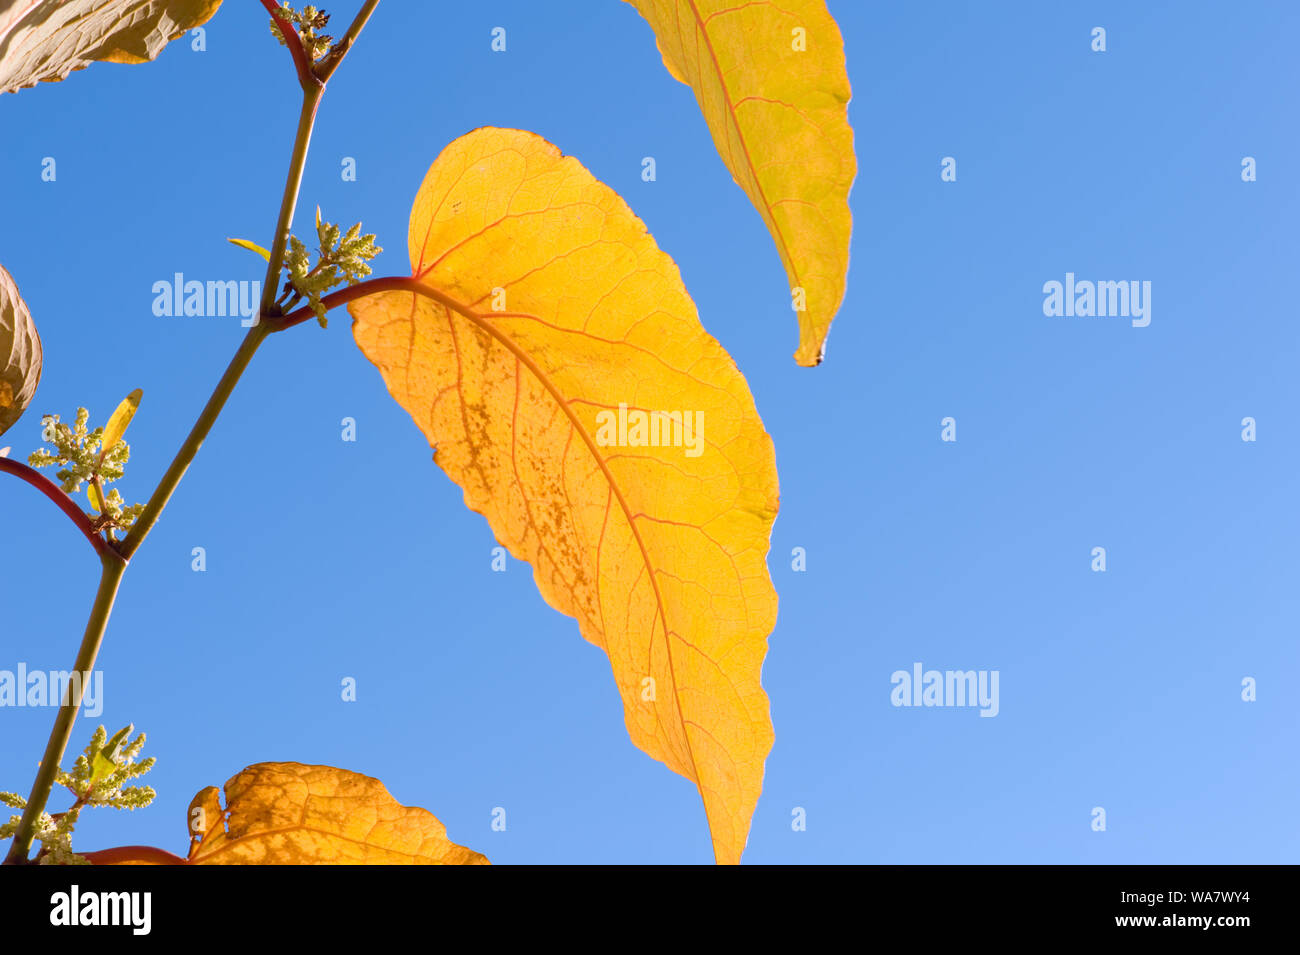 Giant knotweed (Fallopia sachalinensis) leaves in autumn colors against blue sky Stock Photo